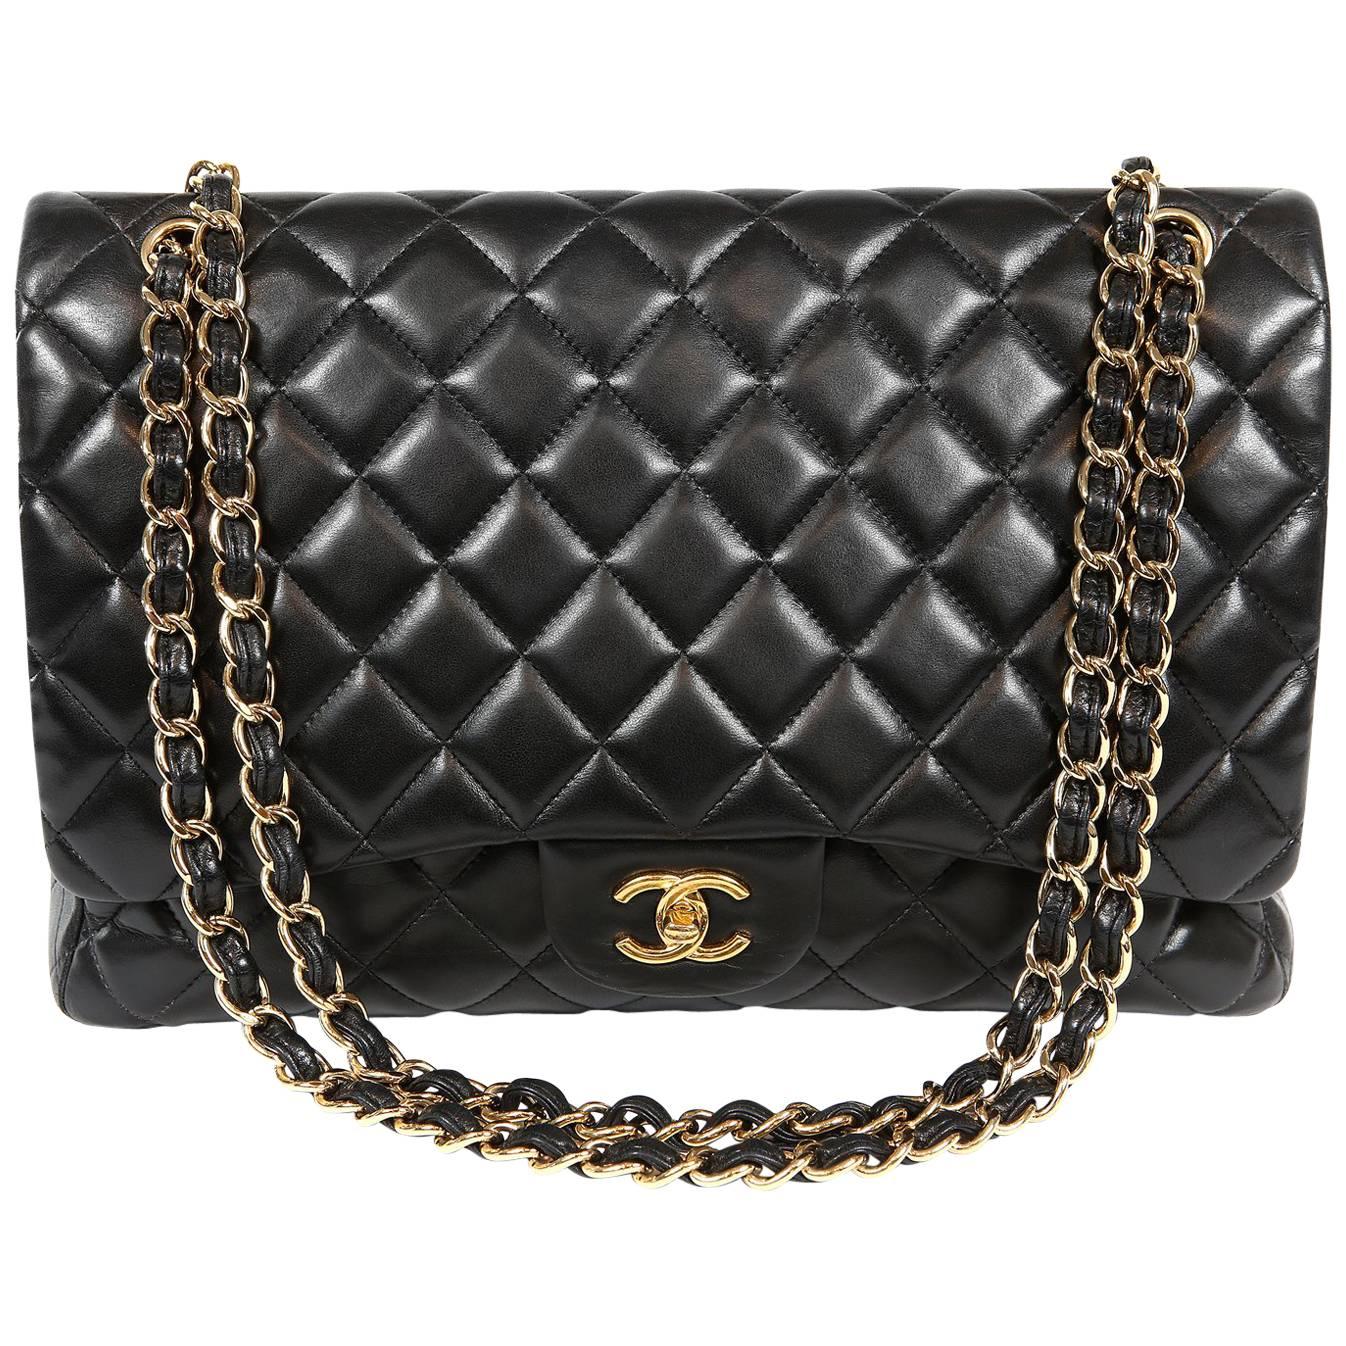 Chanel Black Lambskin Classic Maxi with Gold Hardware